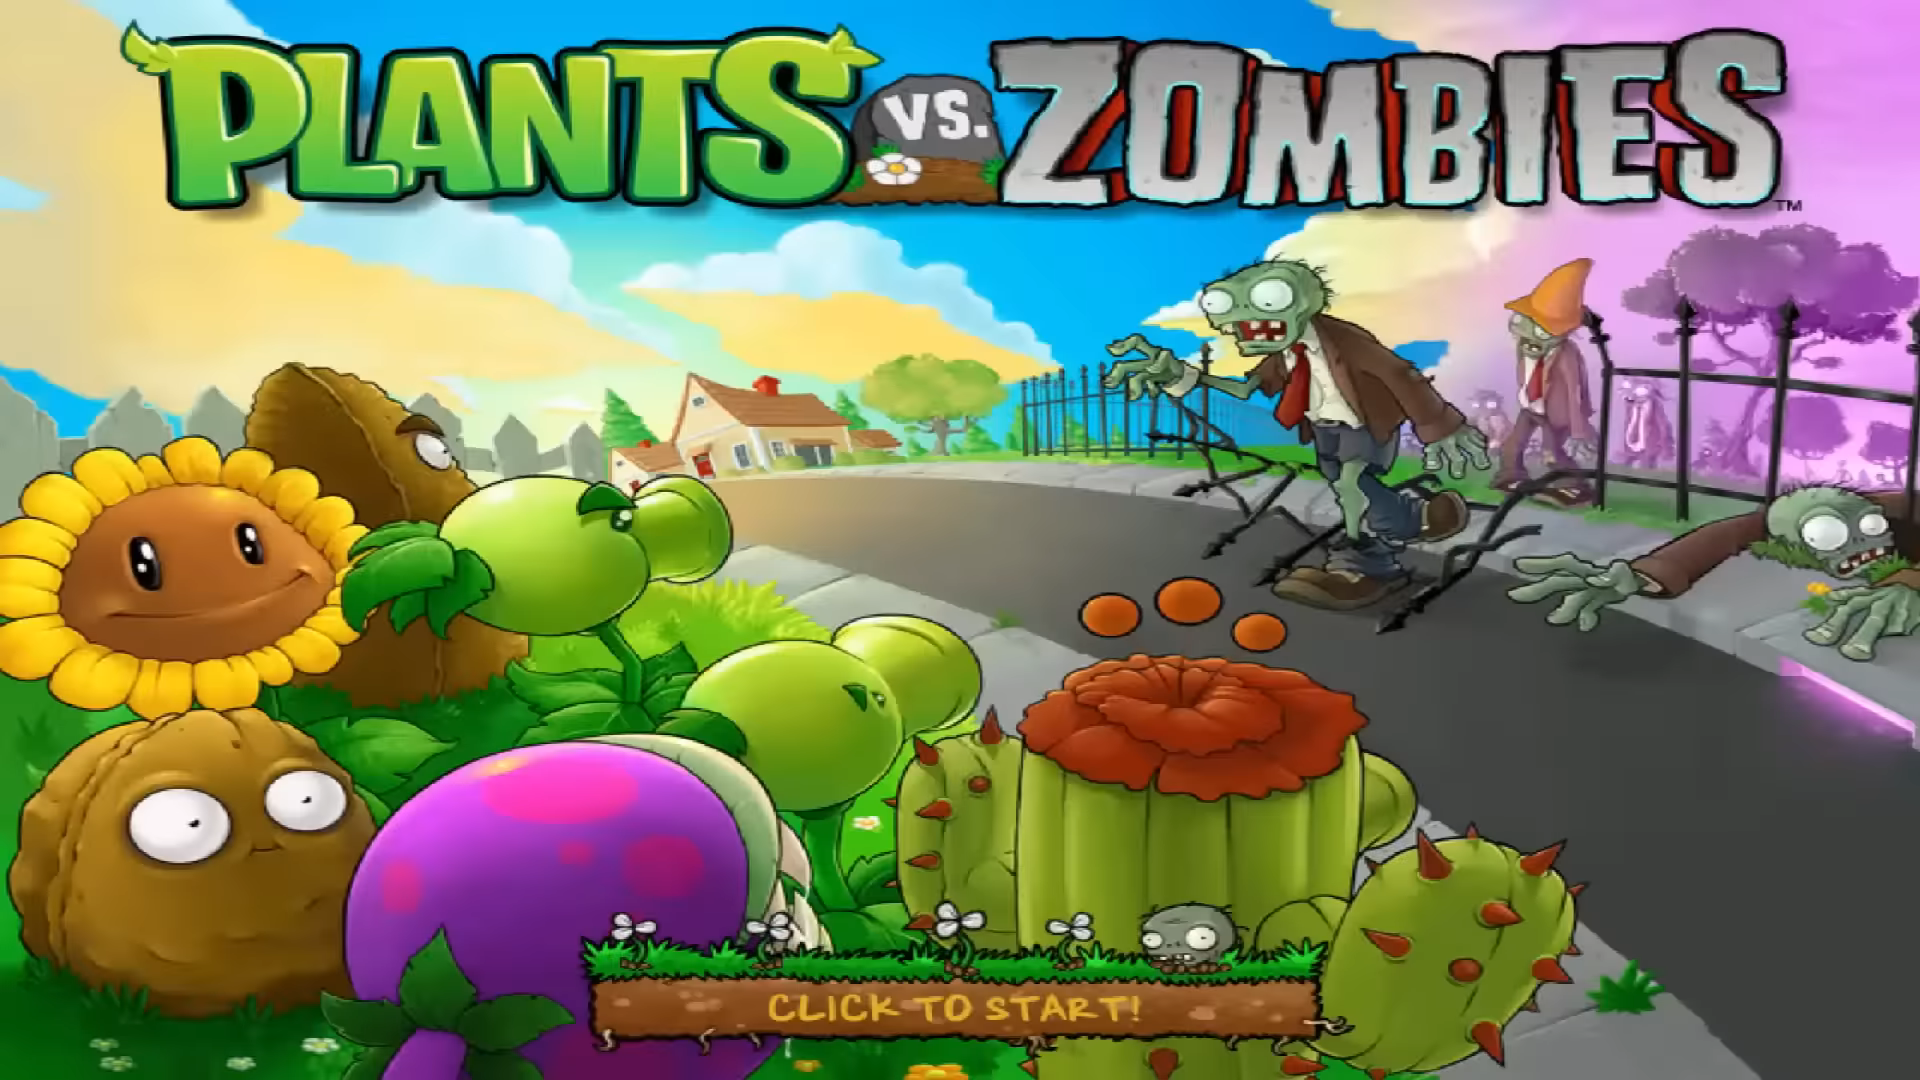 Stream Plants vs Zombies 2: The Casual Game You Need to Play on PC - Free  Download by Enocquipo